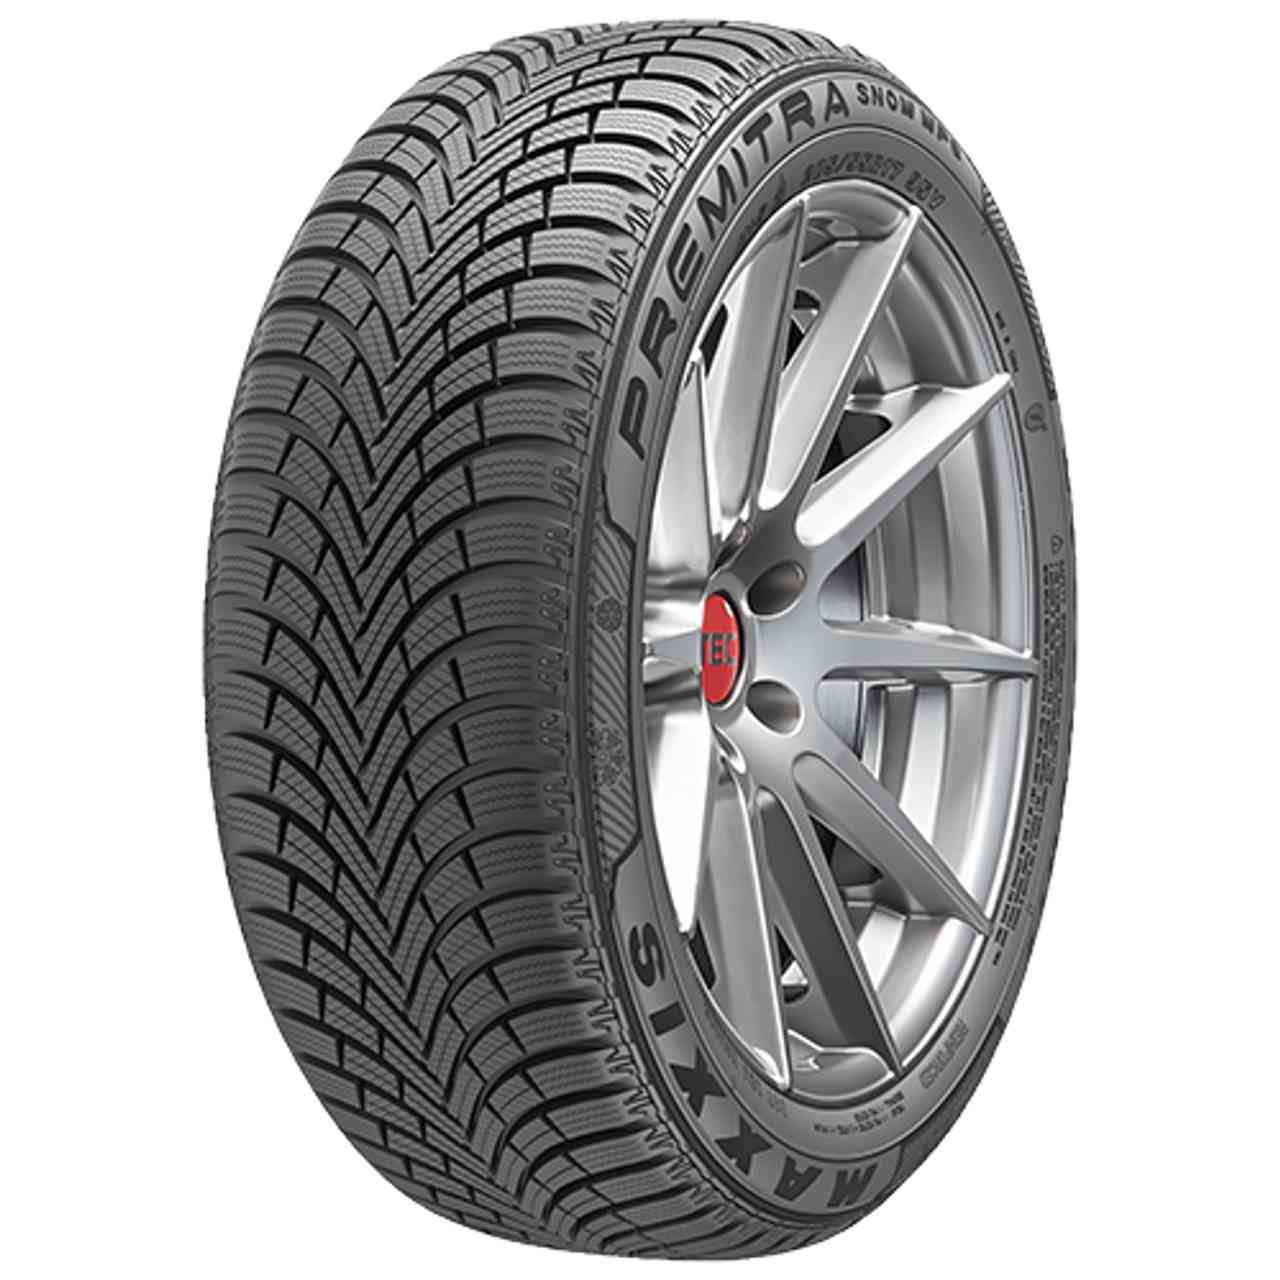 MAXXIS PREMITRA SNOW WP6 245/45R17 99V BSW von MAXXIS